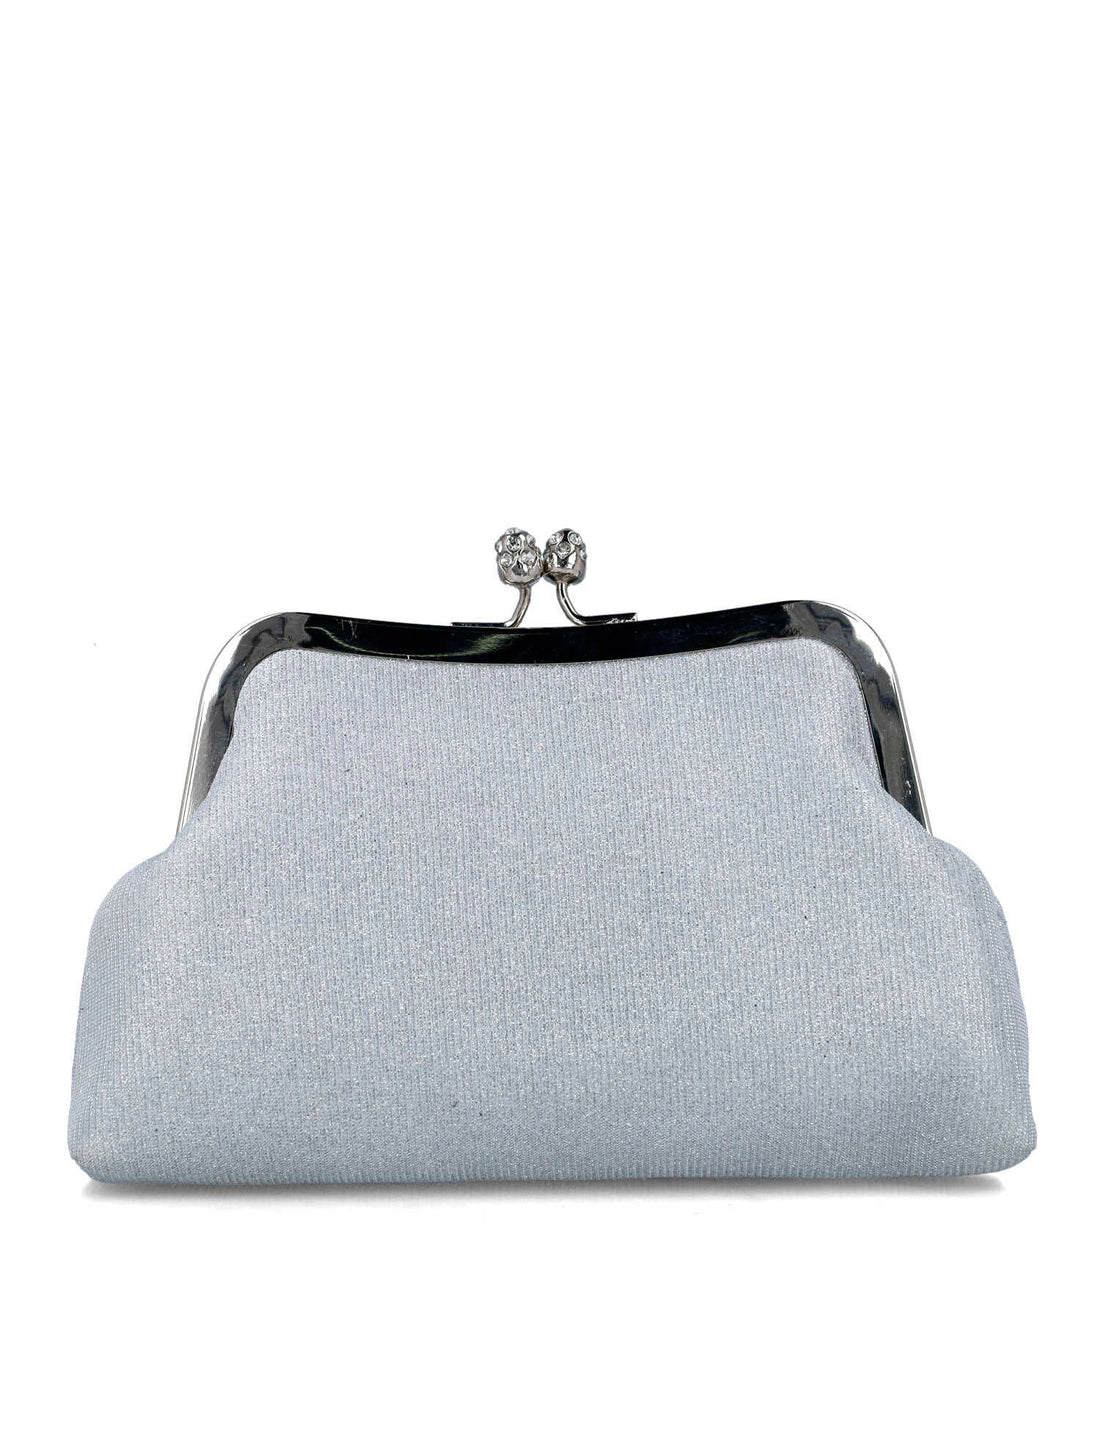 Pouch Style Clutch_85630_09_01